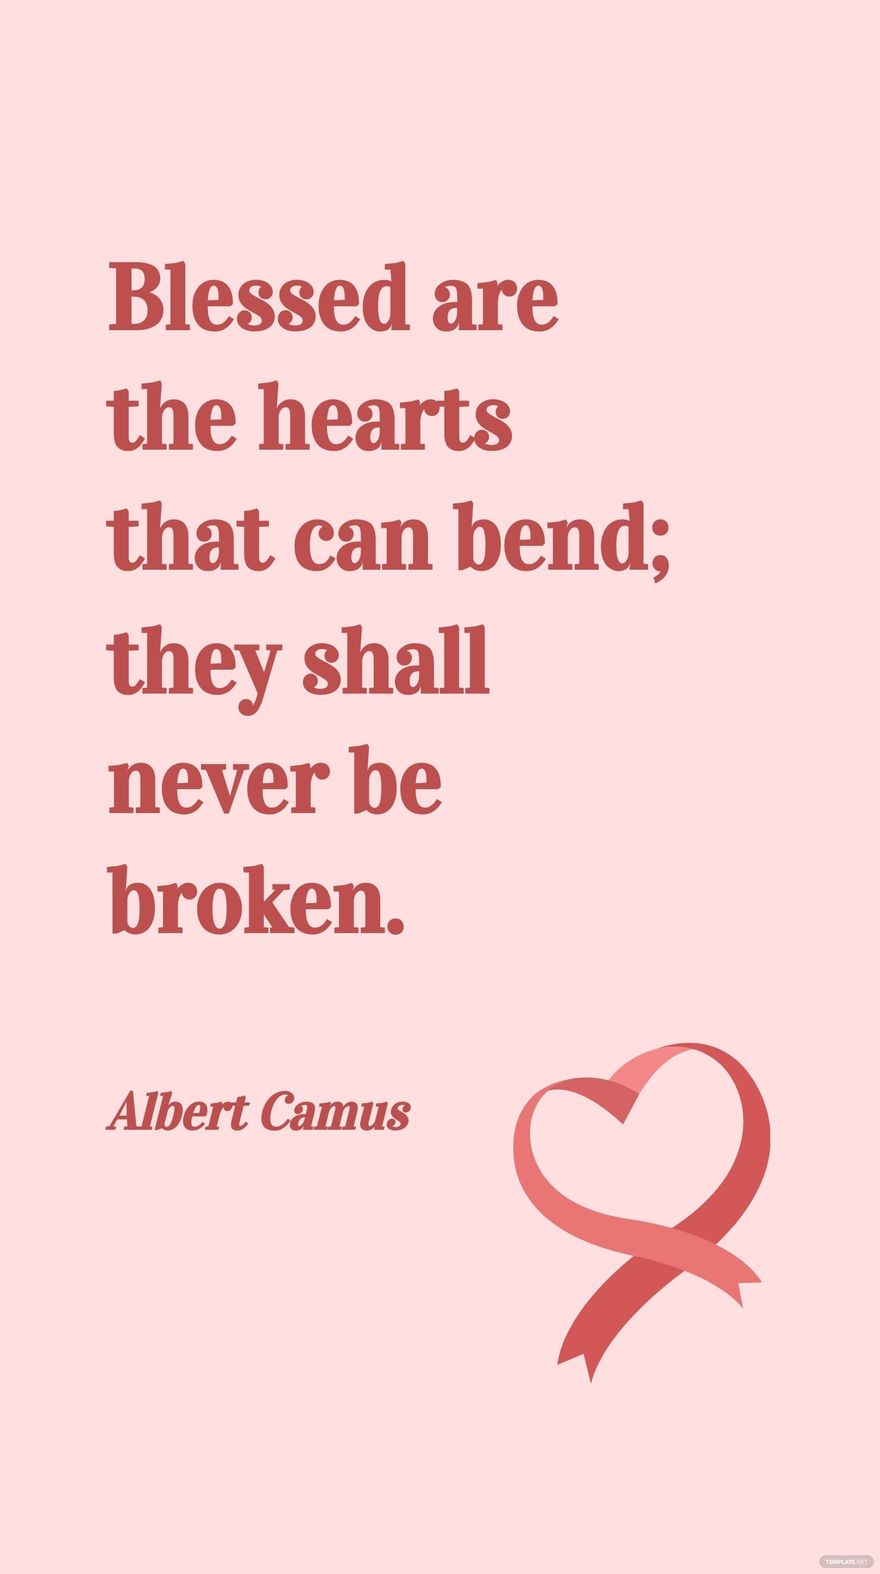 Free Albert Camus - Blessed are the hearts that can bend; they shall never be broken. in JPG